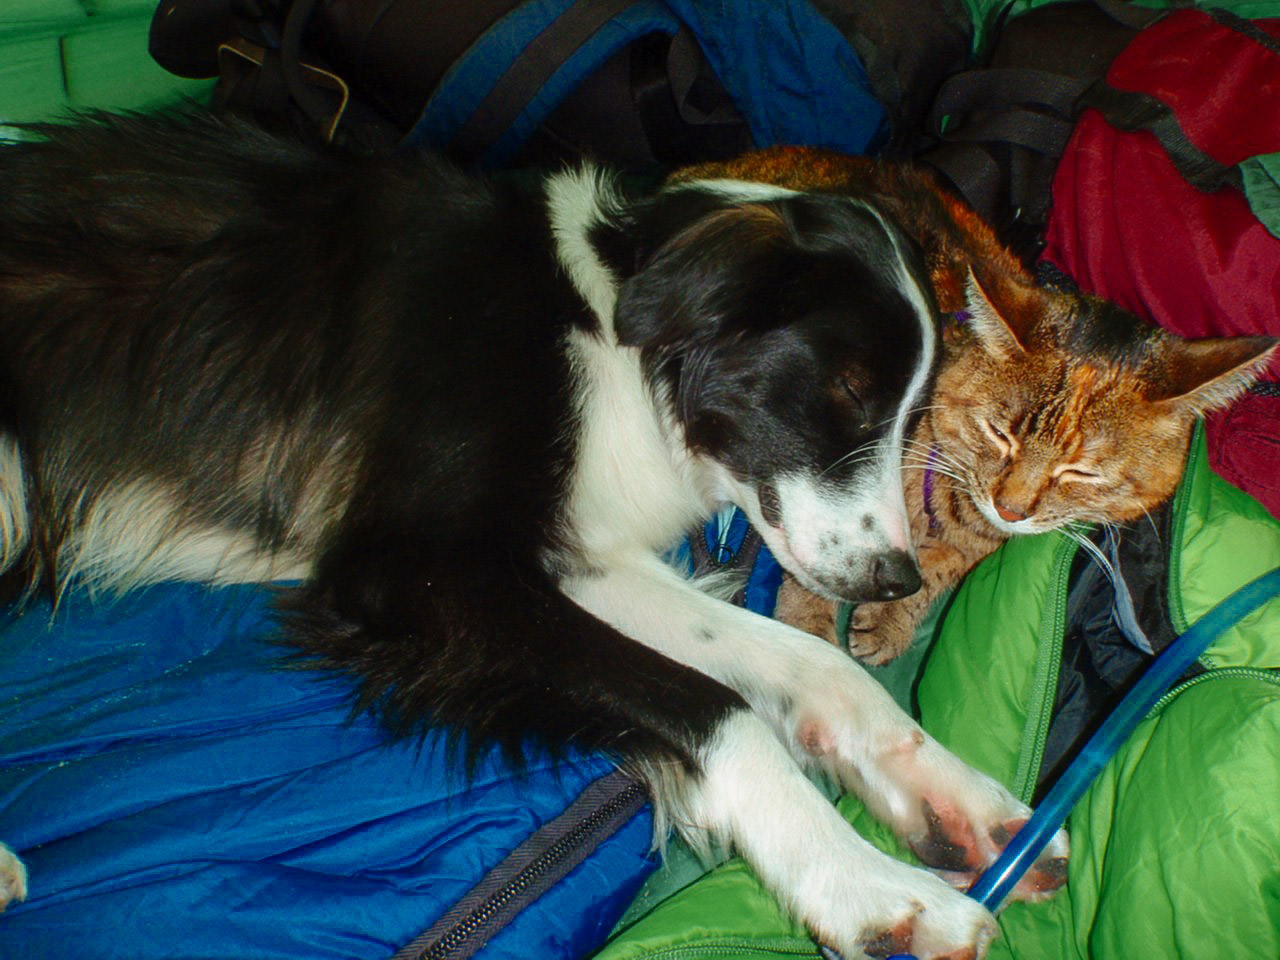 Cat snuggles with dog for nap